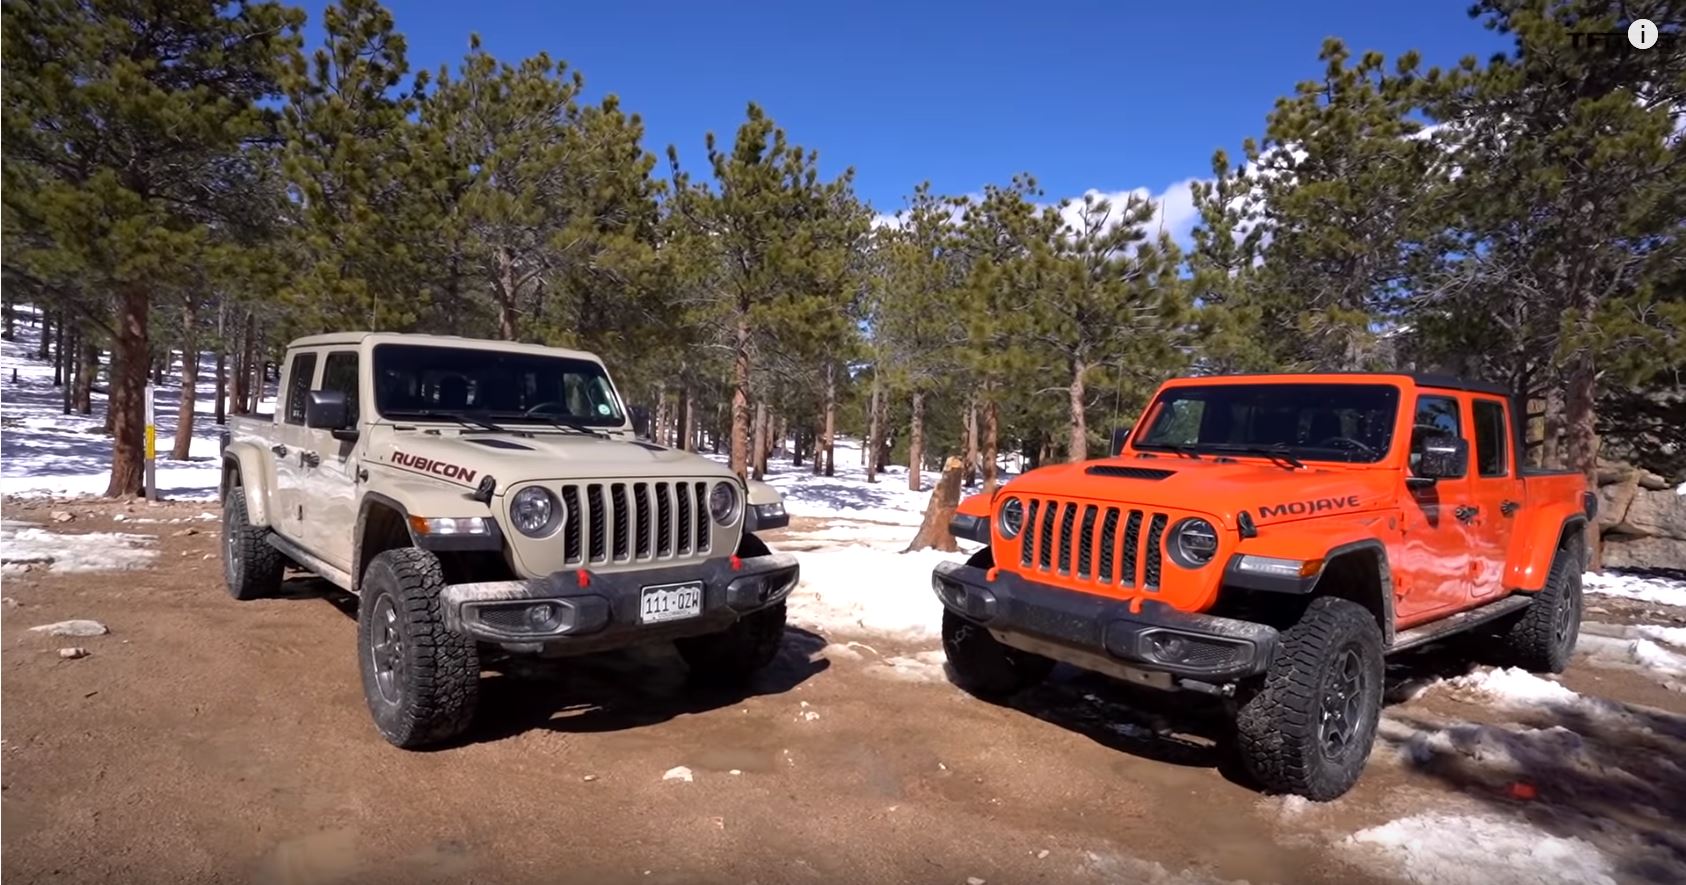 Gladiator Mojave vs. Rubicon: Which One Is the Master Off-roader?